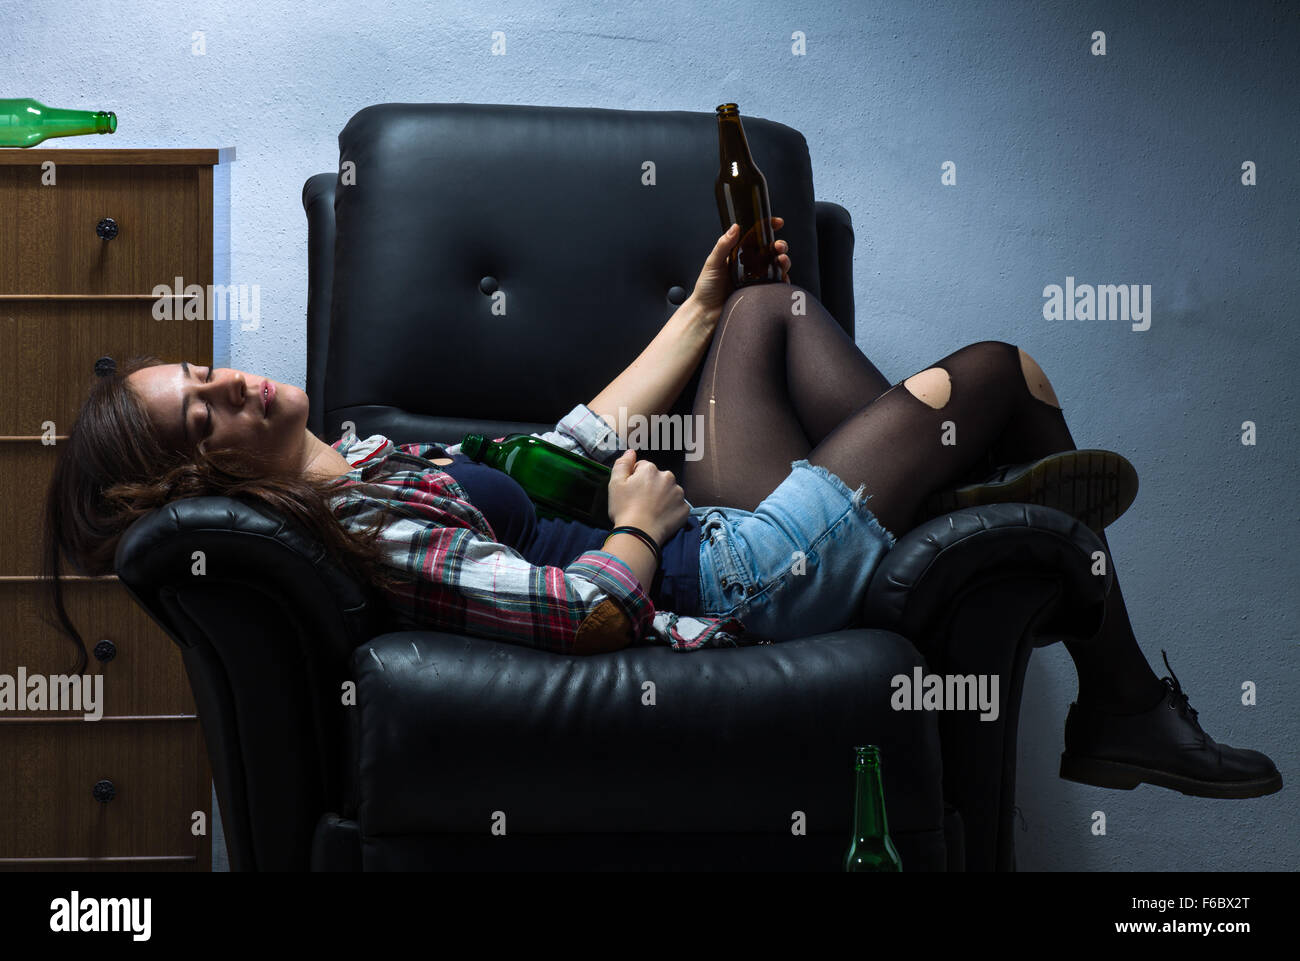 Drunk Woman Sleeping on Armchair with Beer Bottles Stock Photo